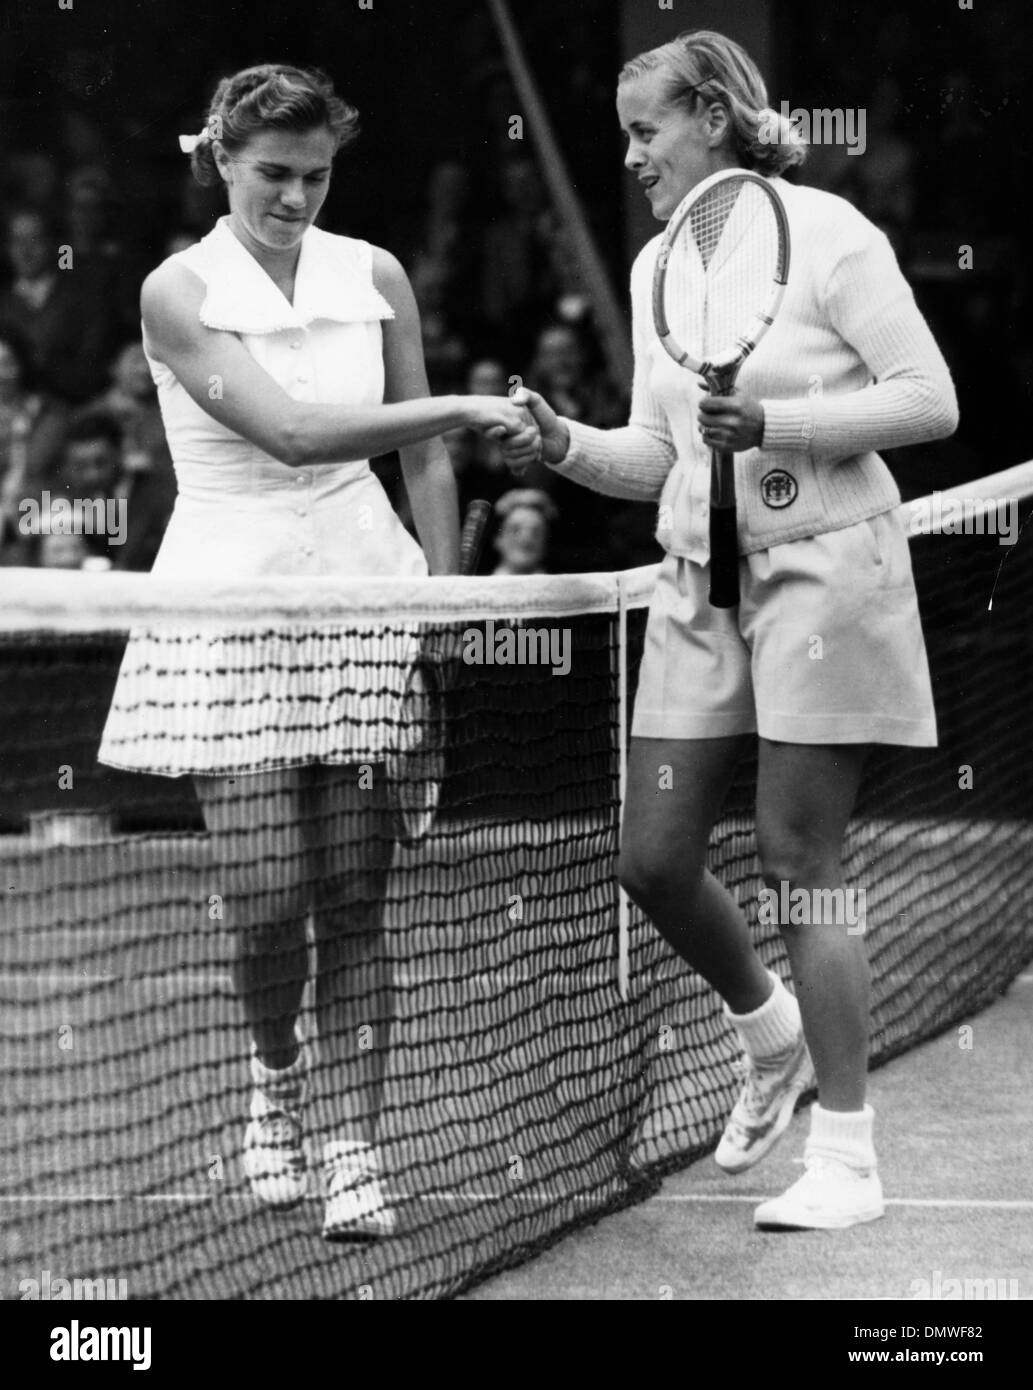 May 8, 1960 - Location Unknown - SHIRLEY FRY IRVIN, born June 30, 1927, is  a World No. 1 tennis player. She is one of only five persons to have won  each